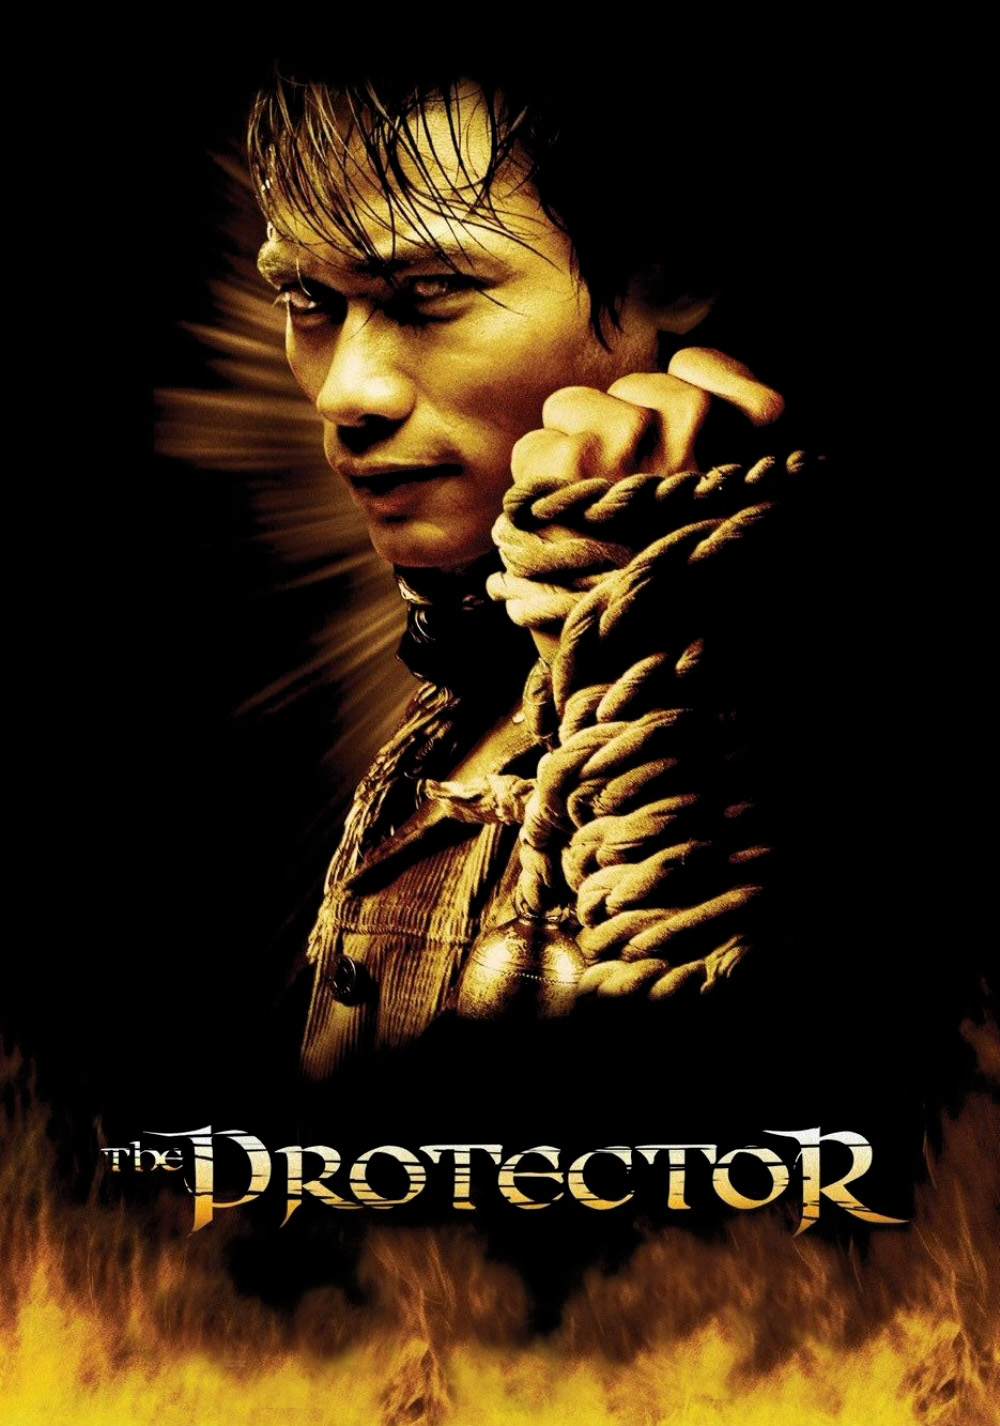 The Protector (2005) Picture